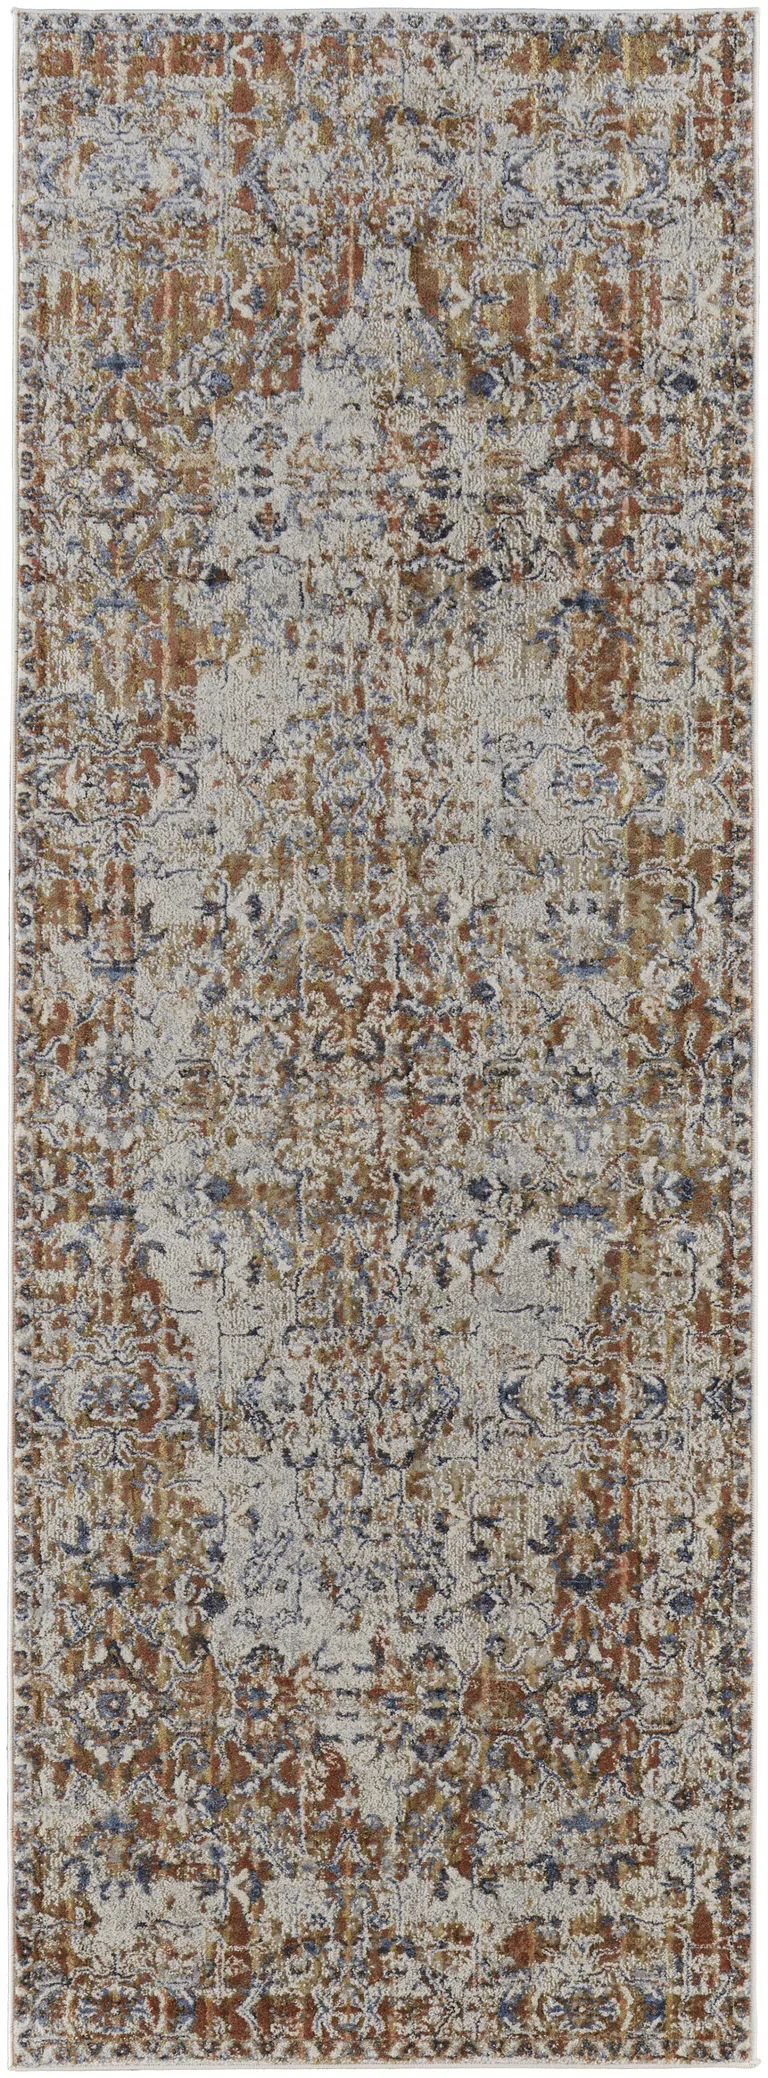 12' Tan Ivory And Orange Floral Power Loom Runner Rug With Fringe Photo 1